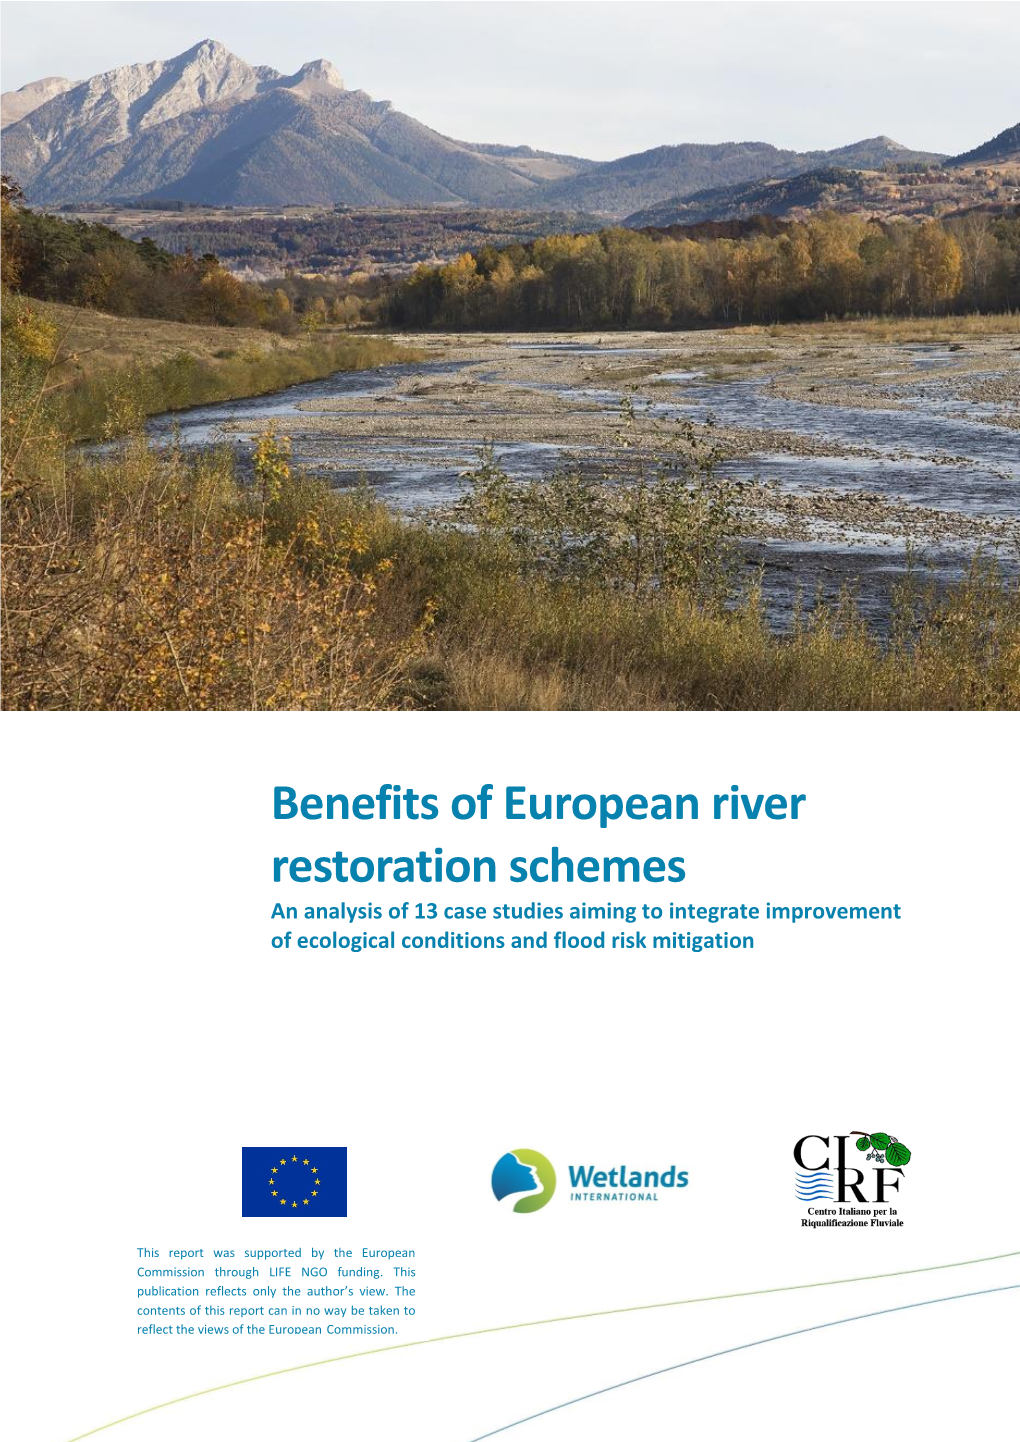 Benefits of European River Restoration Schemes an Analysis of 13 Case Studies Aiming to Integrate Improvement of Ecological Conditions and Flood Risk Mitigation